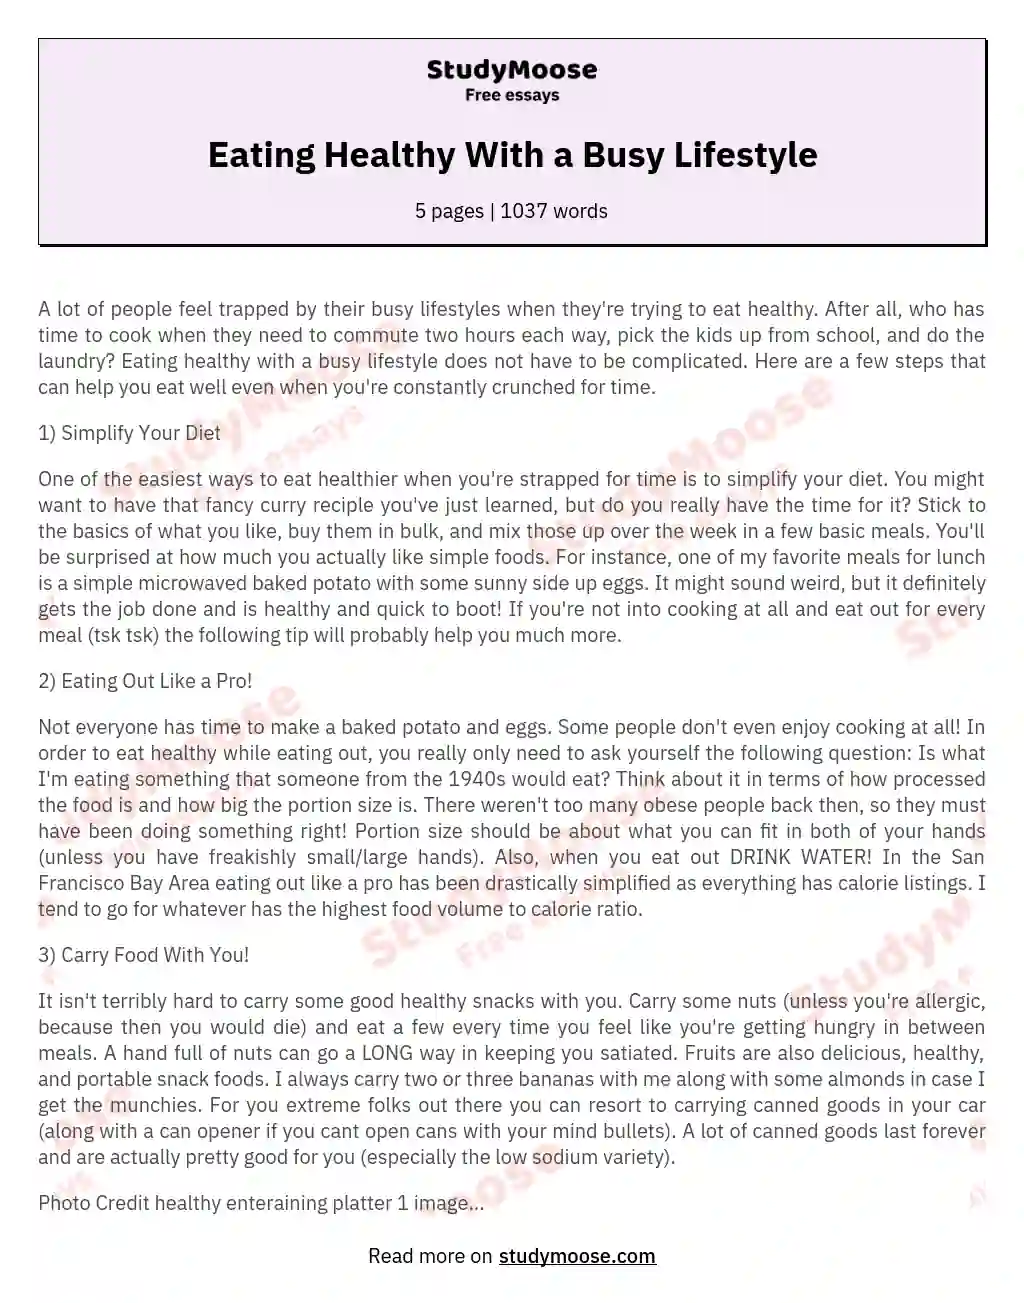 Eating Healthy With a Busy Lifestyle